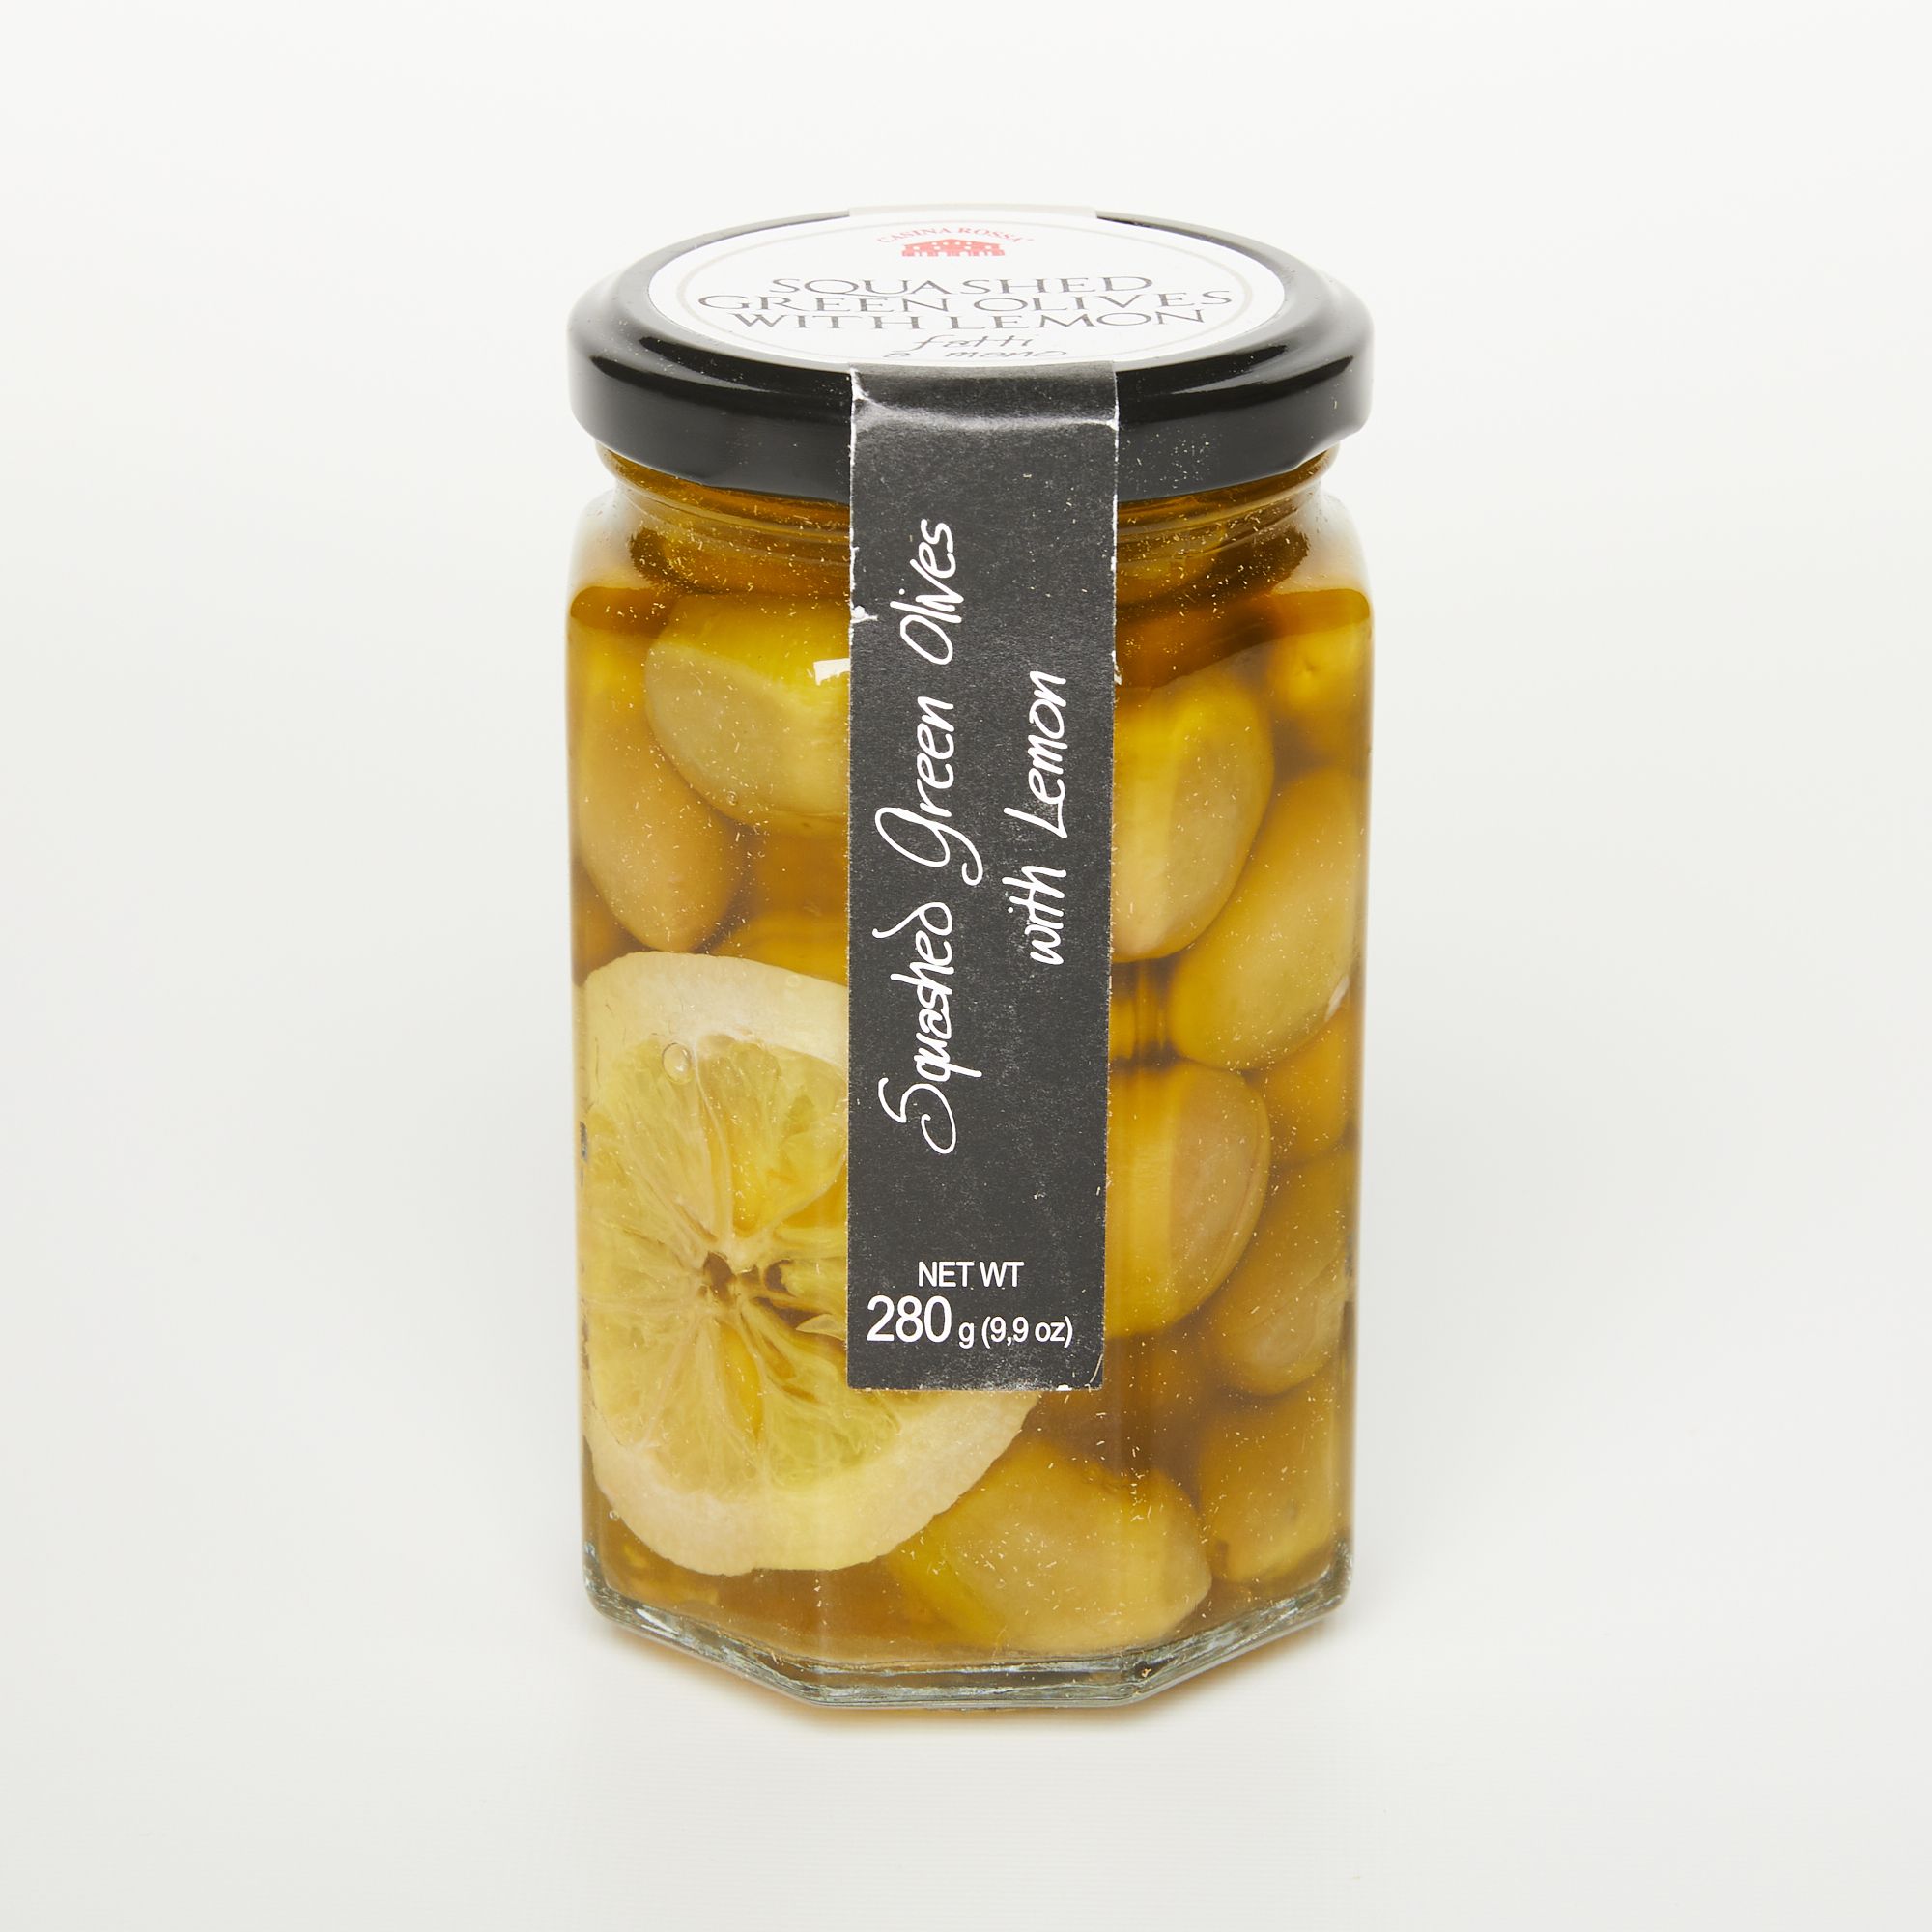 A jar of olives with lemon with a black screw lid - a label reads "Green Olives with Lemon"